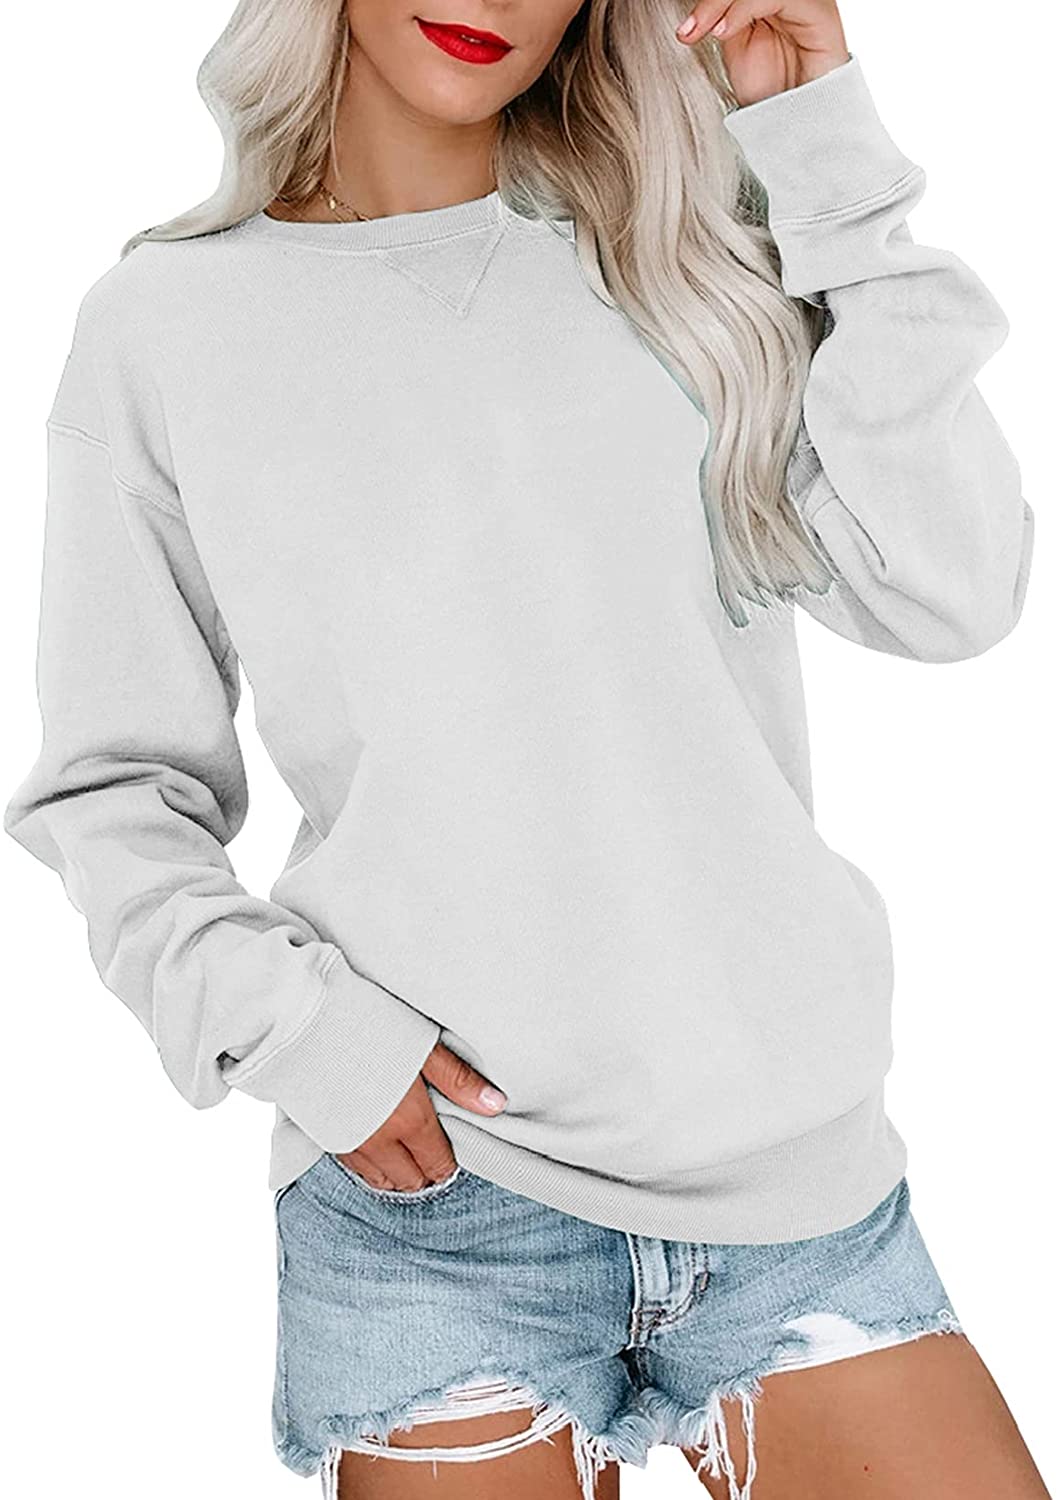 Orchidays Womens Casual Crewneck Sweatshirts Long Sleeve Cute Tunic Tops Loose Fitting Pullovers 